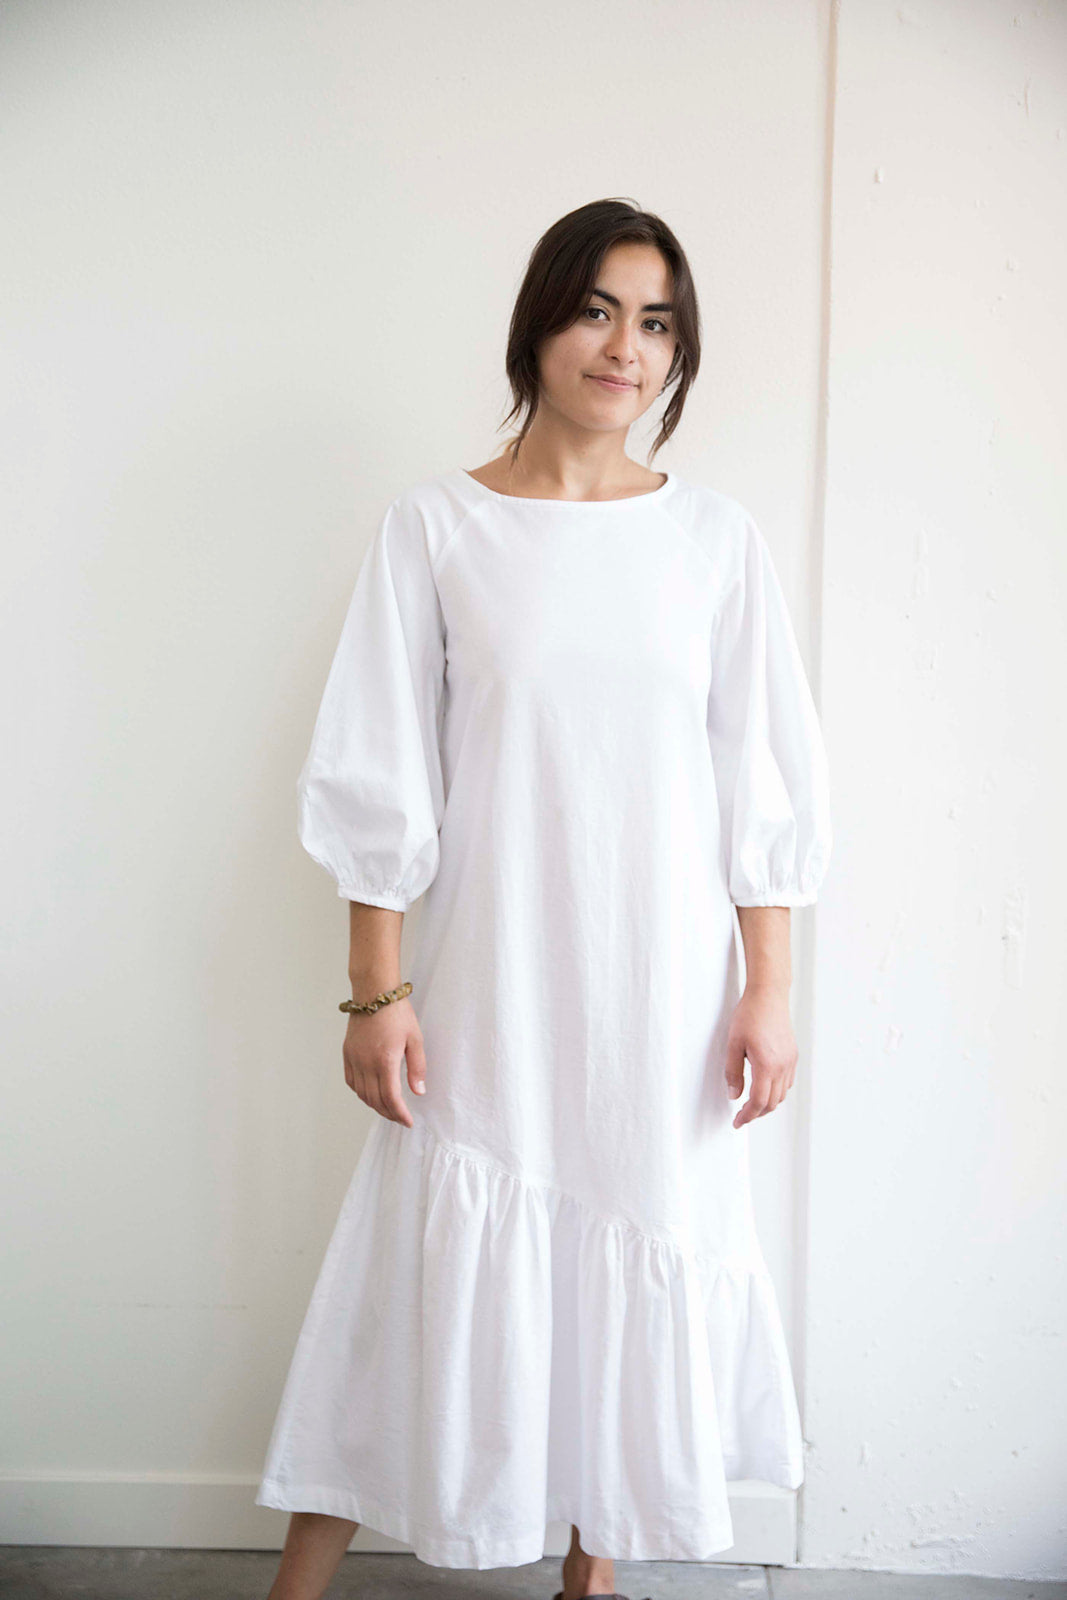 Sophia wears the white Masako Midi dress with bracelet length sleeve, asymmetrical rushed hem detail part of the Hanae Collection by The Cura Co